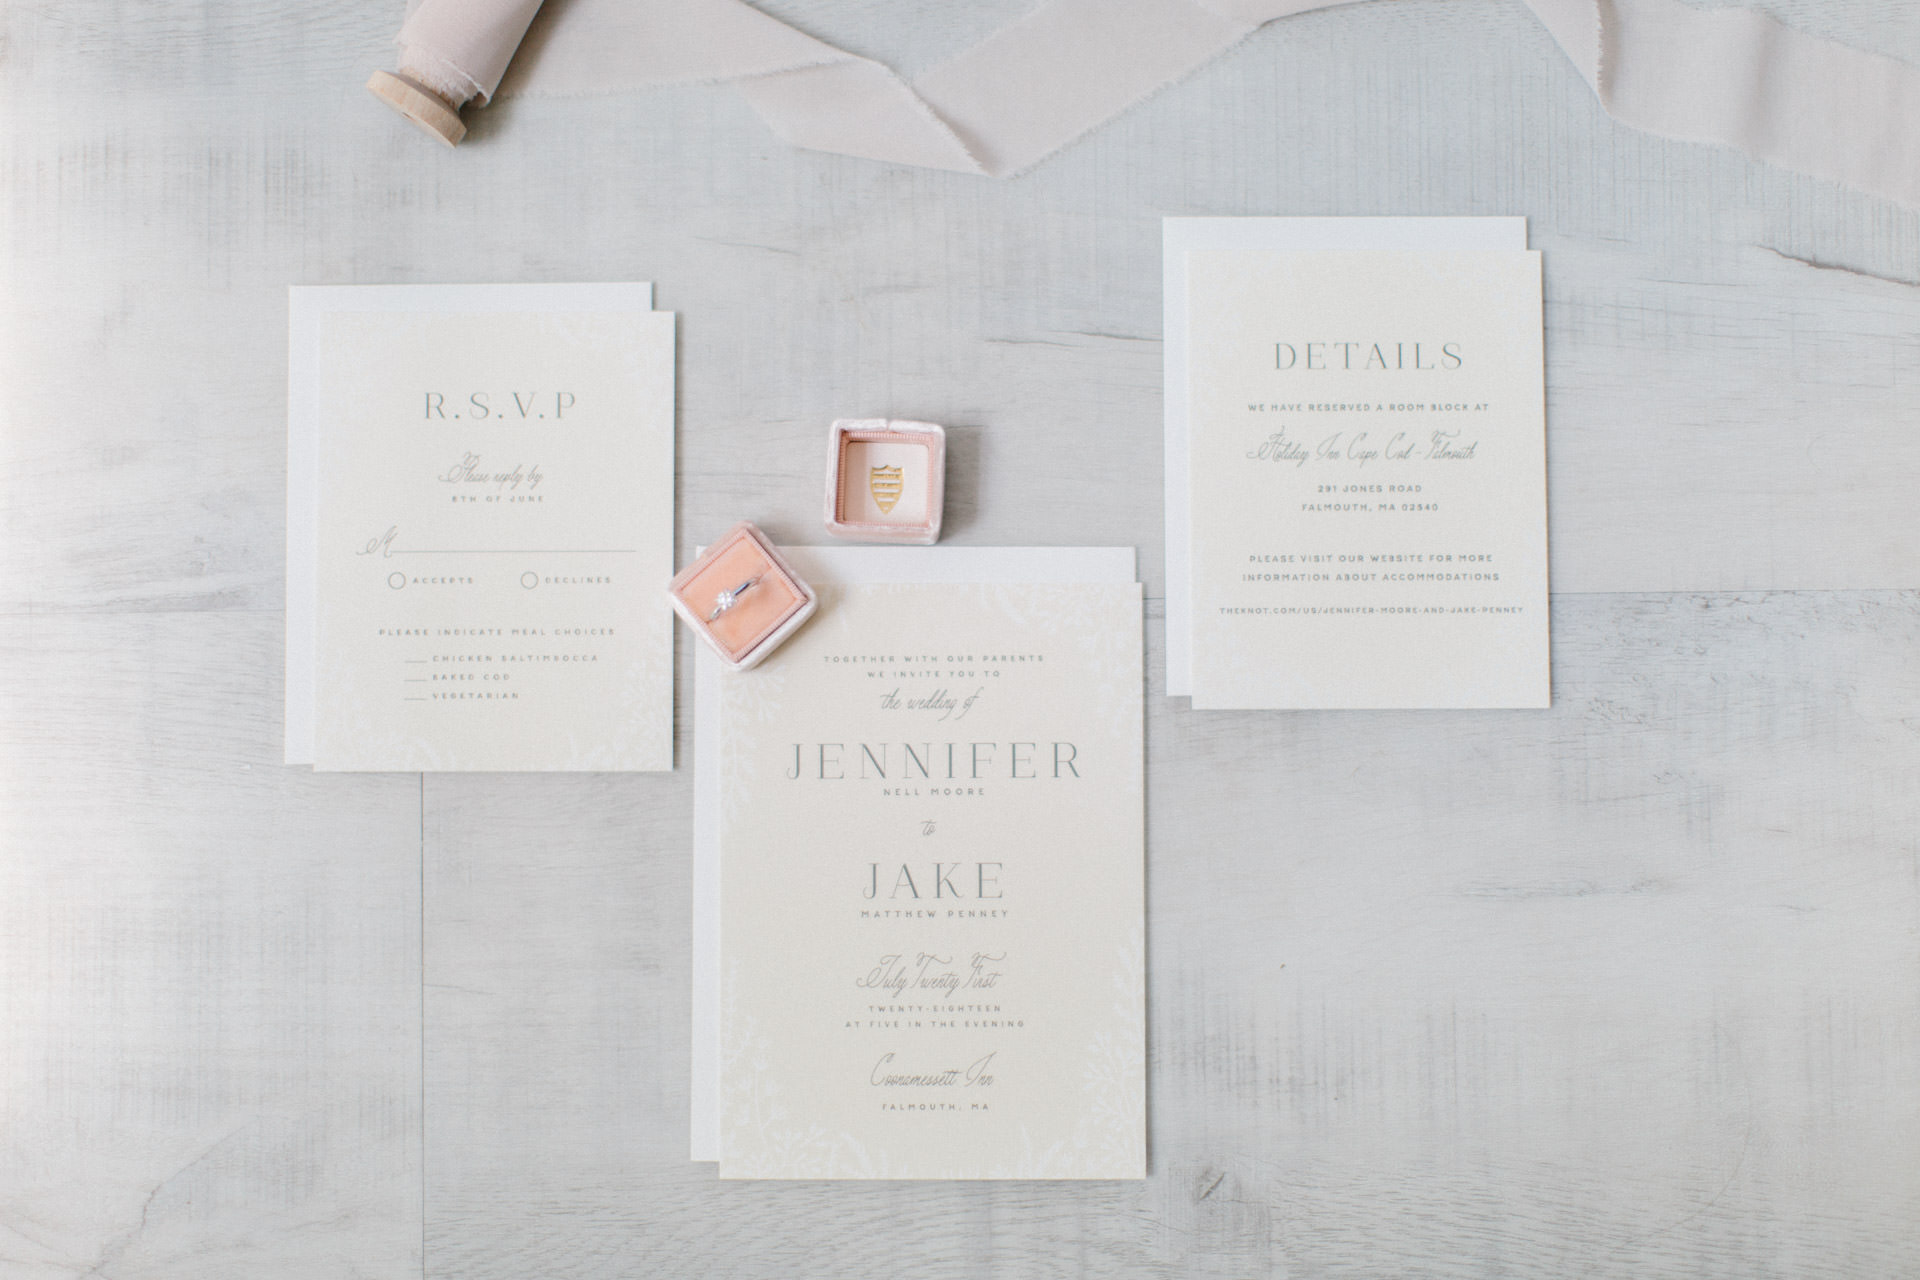 Invitation and RSVP for a wedding at The Coonamessett Inn in Falmouth, MA